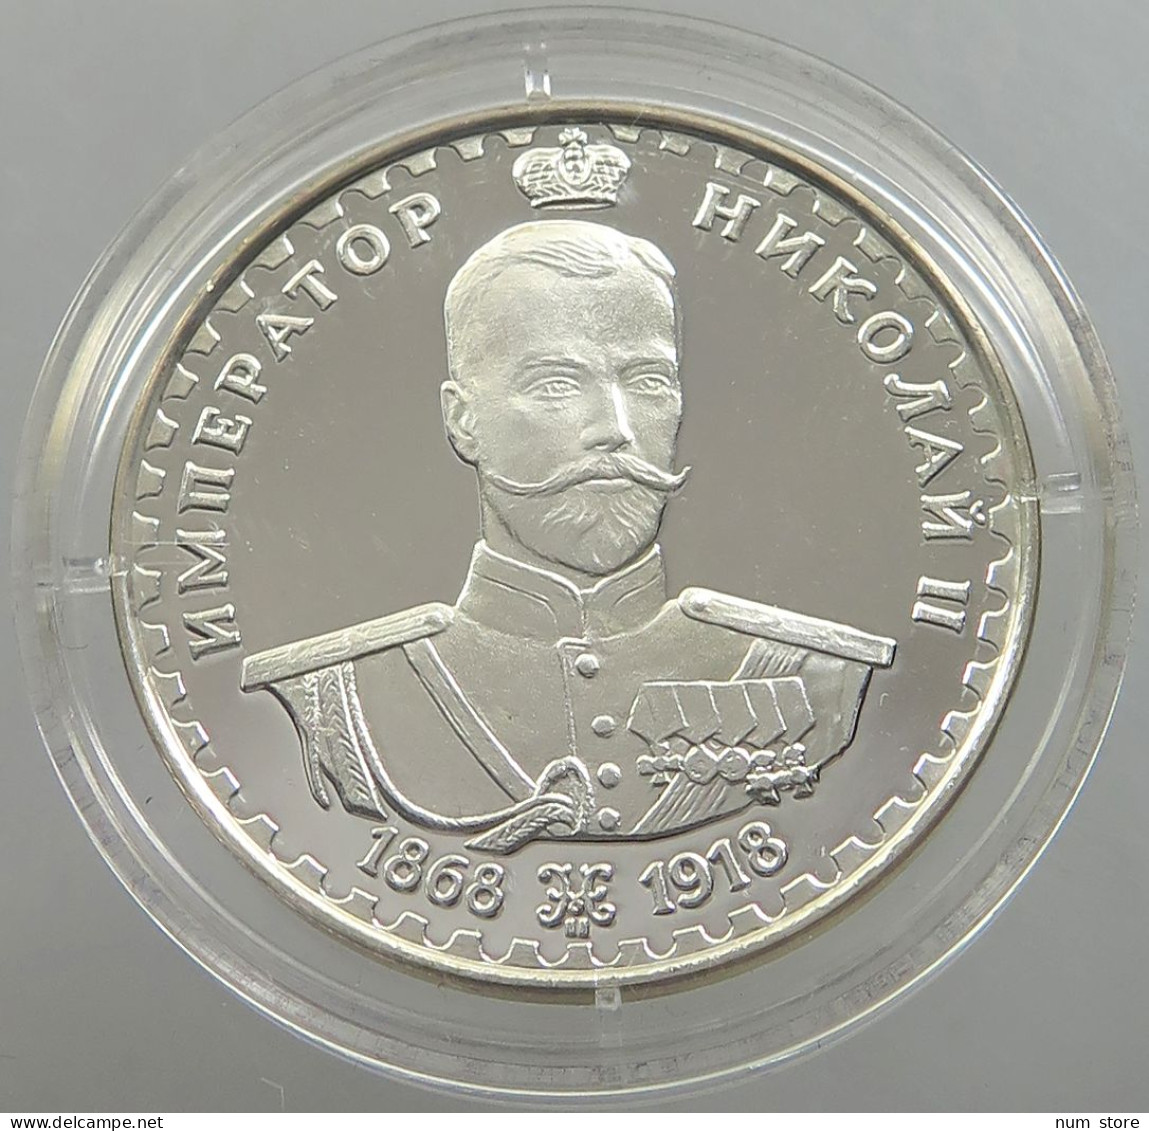 RUSSIA SILVER MEDAL NIKOLAUS 1868-1918 PROOF 10G #sm14 0189 - Russie